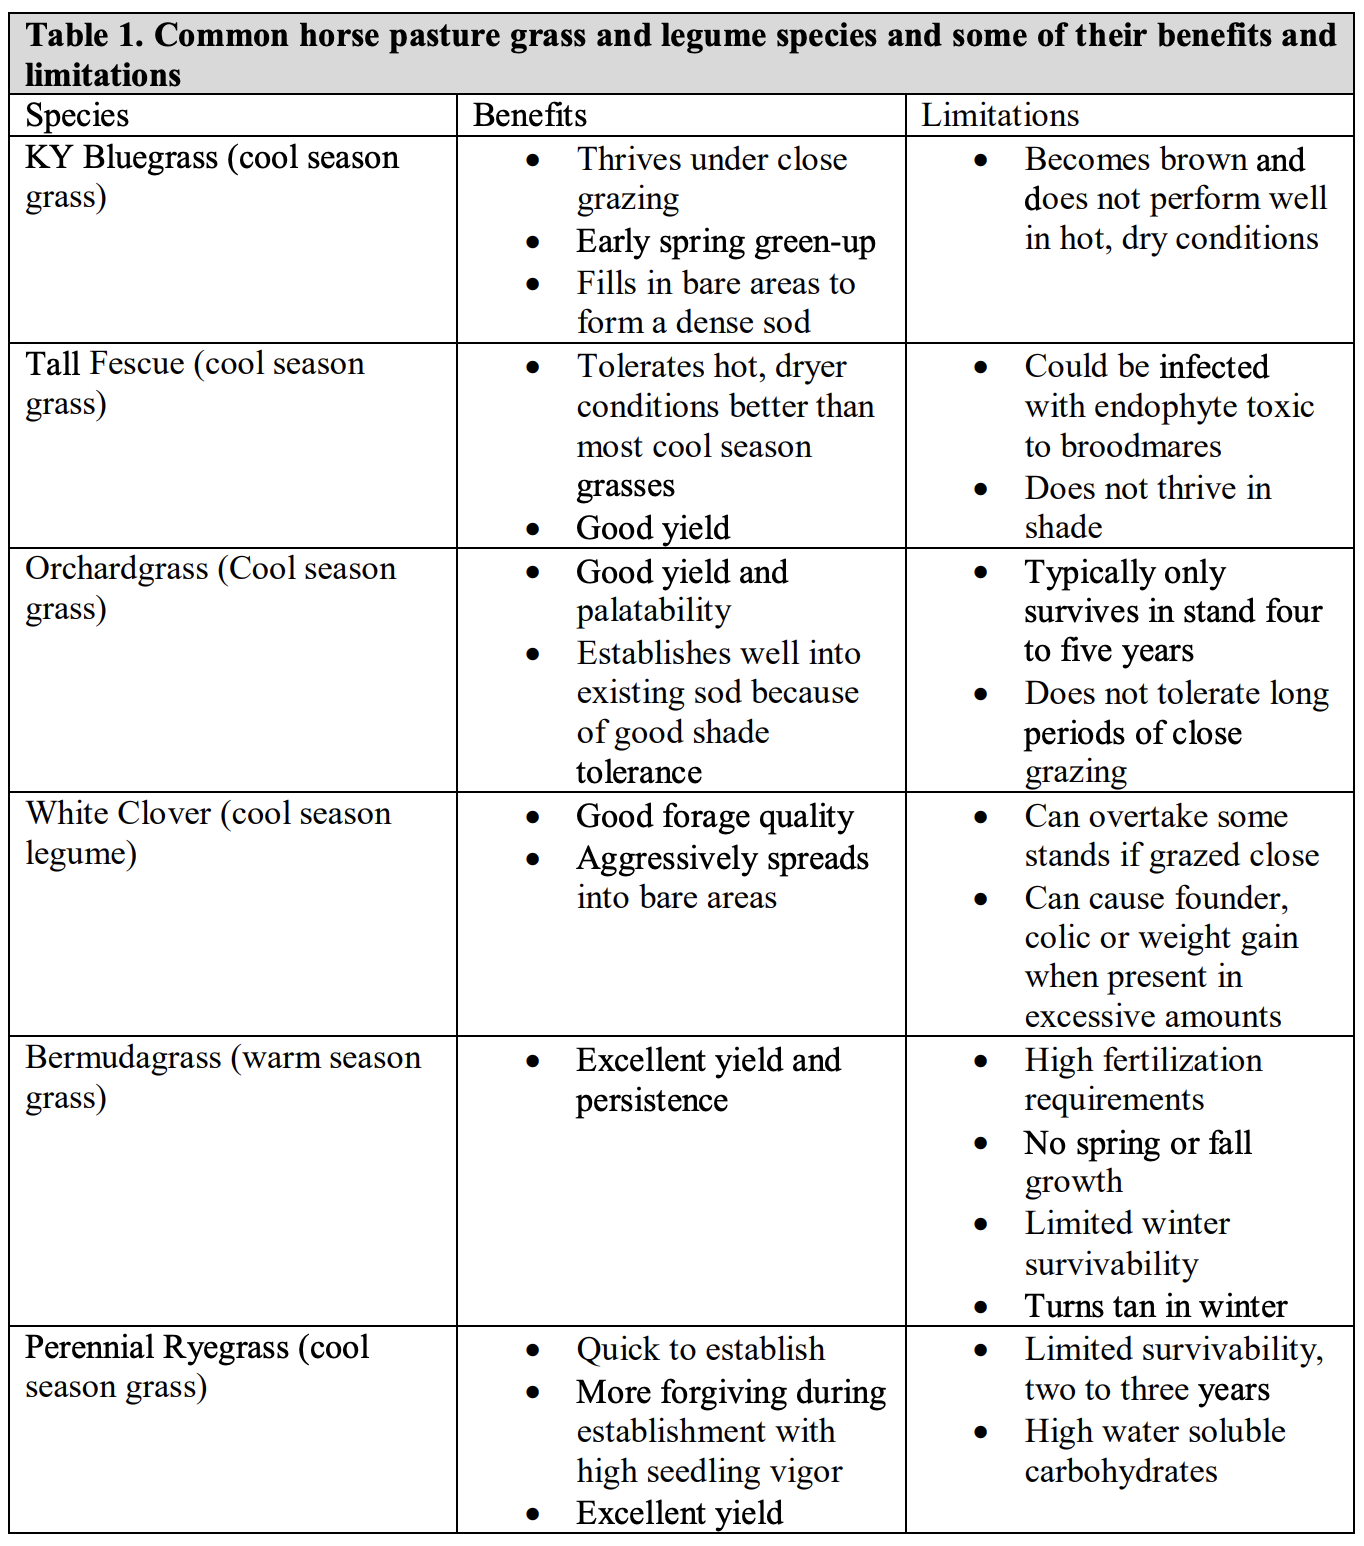 Table of common horse pasture grass and legume species and some of their benefits and limitations